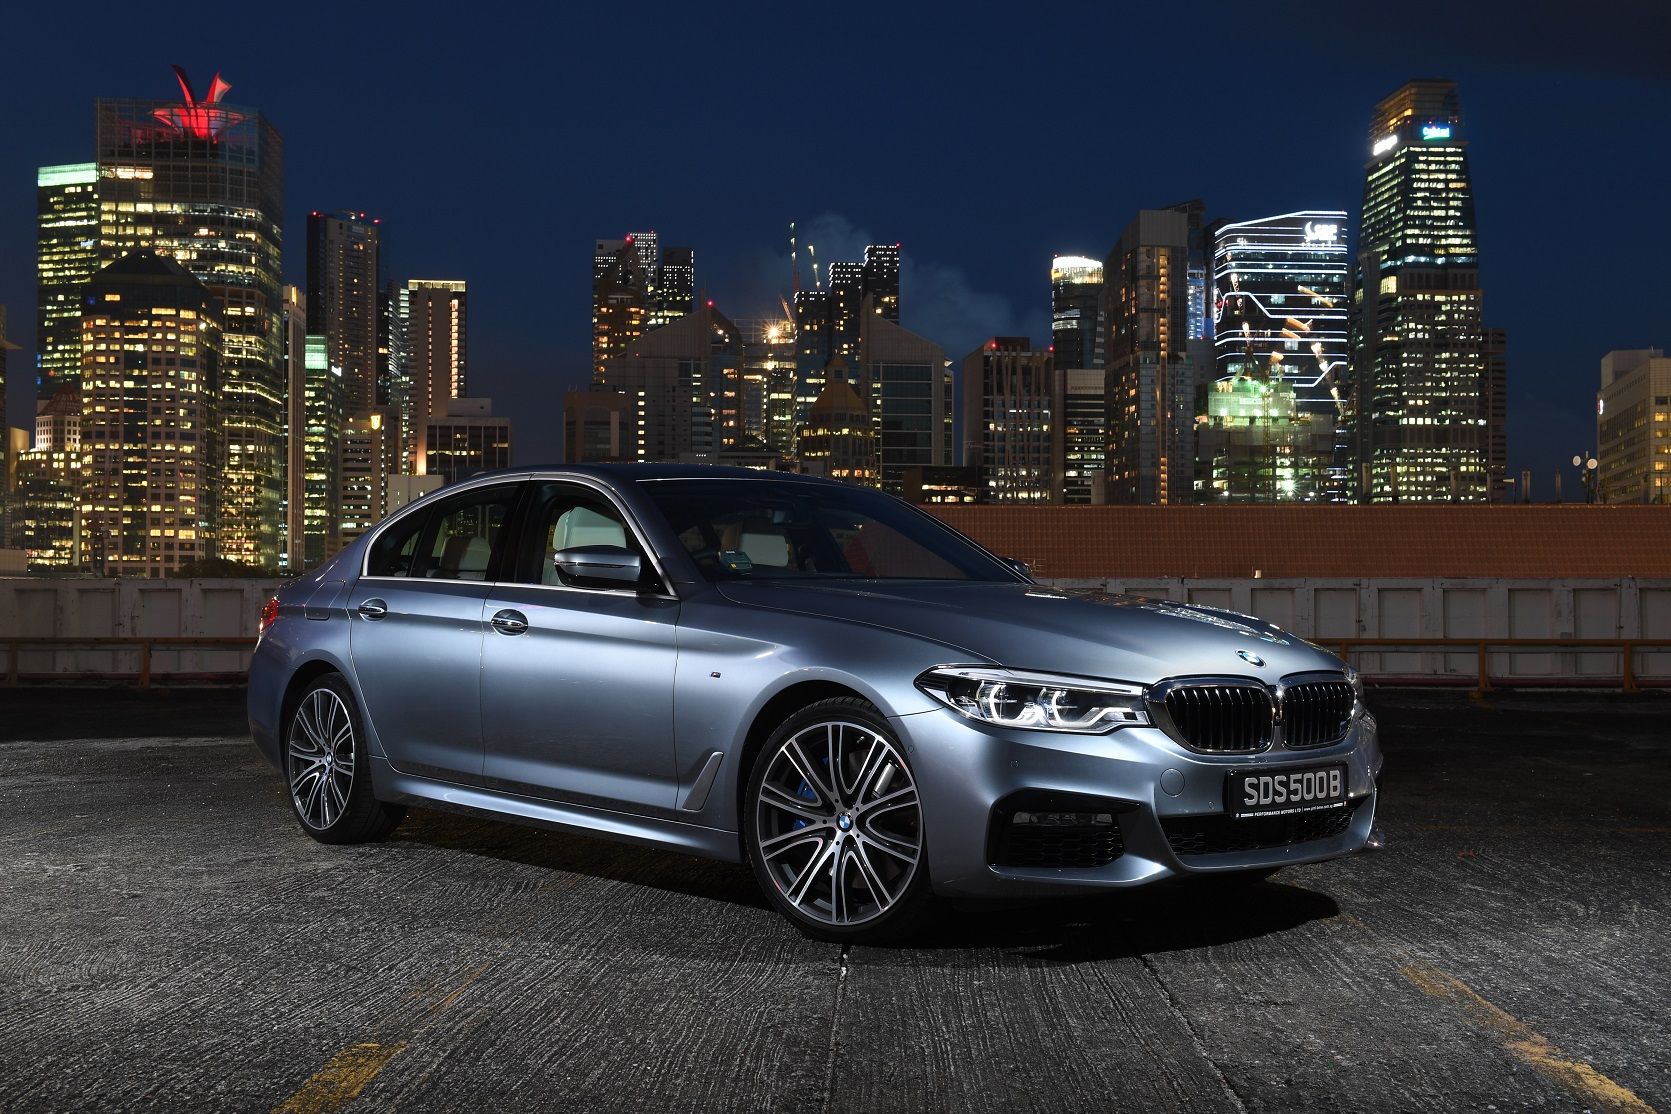 Overdrive: The new BMW 5 Series is a smorgasbord of tech